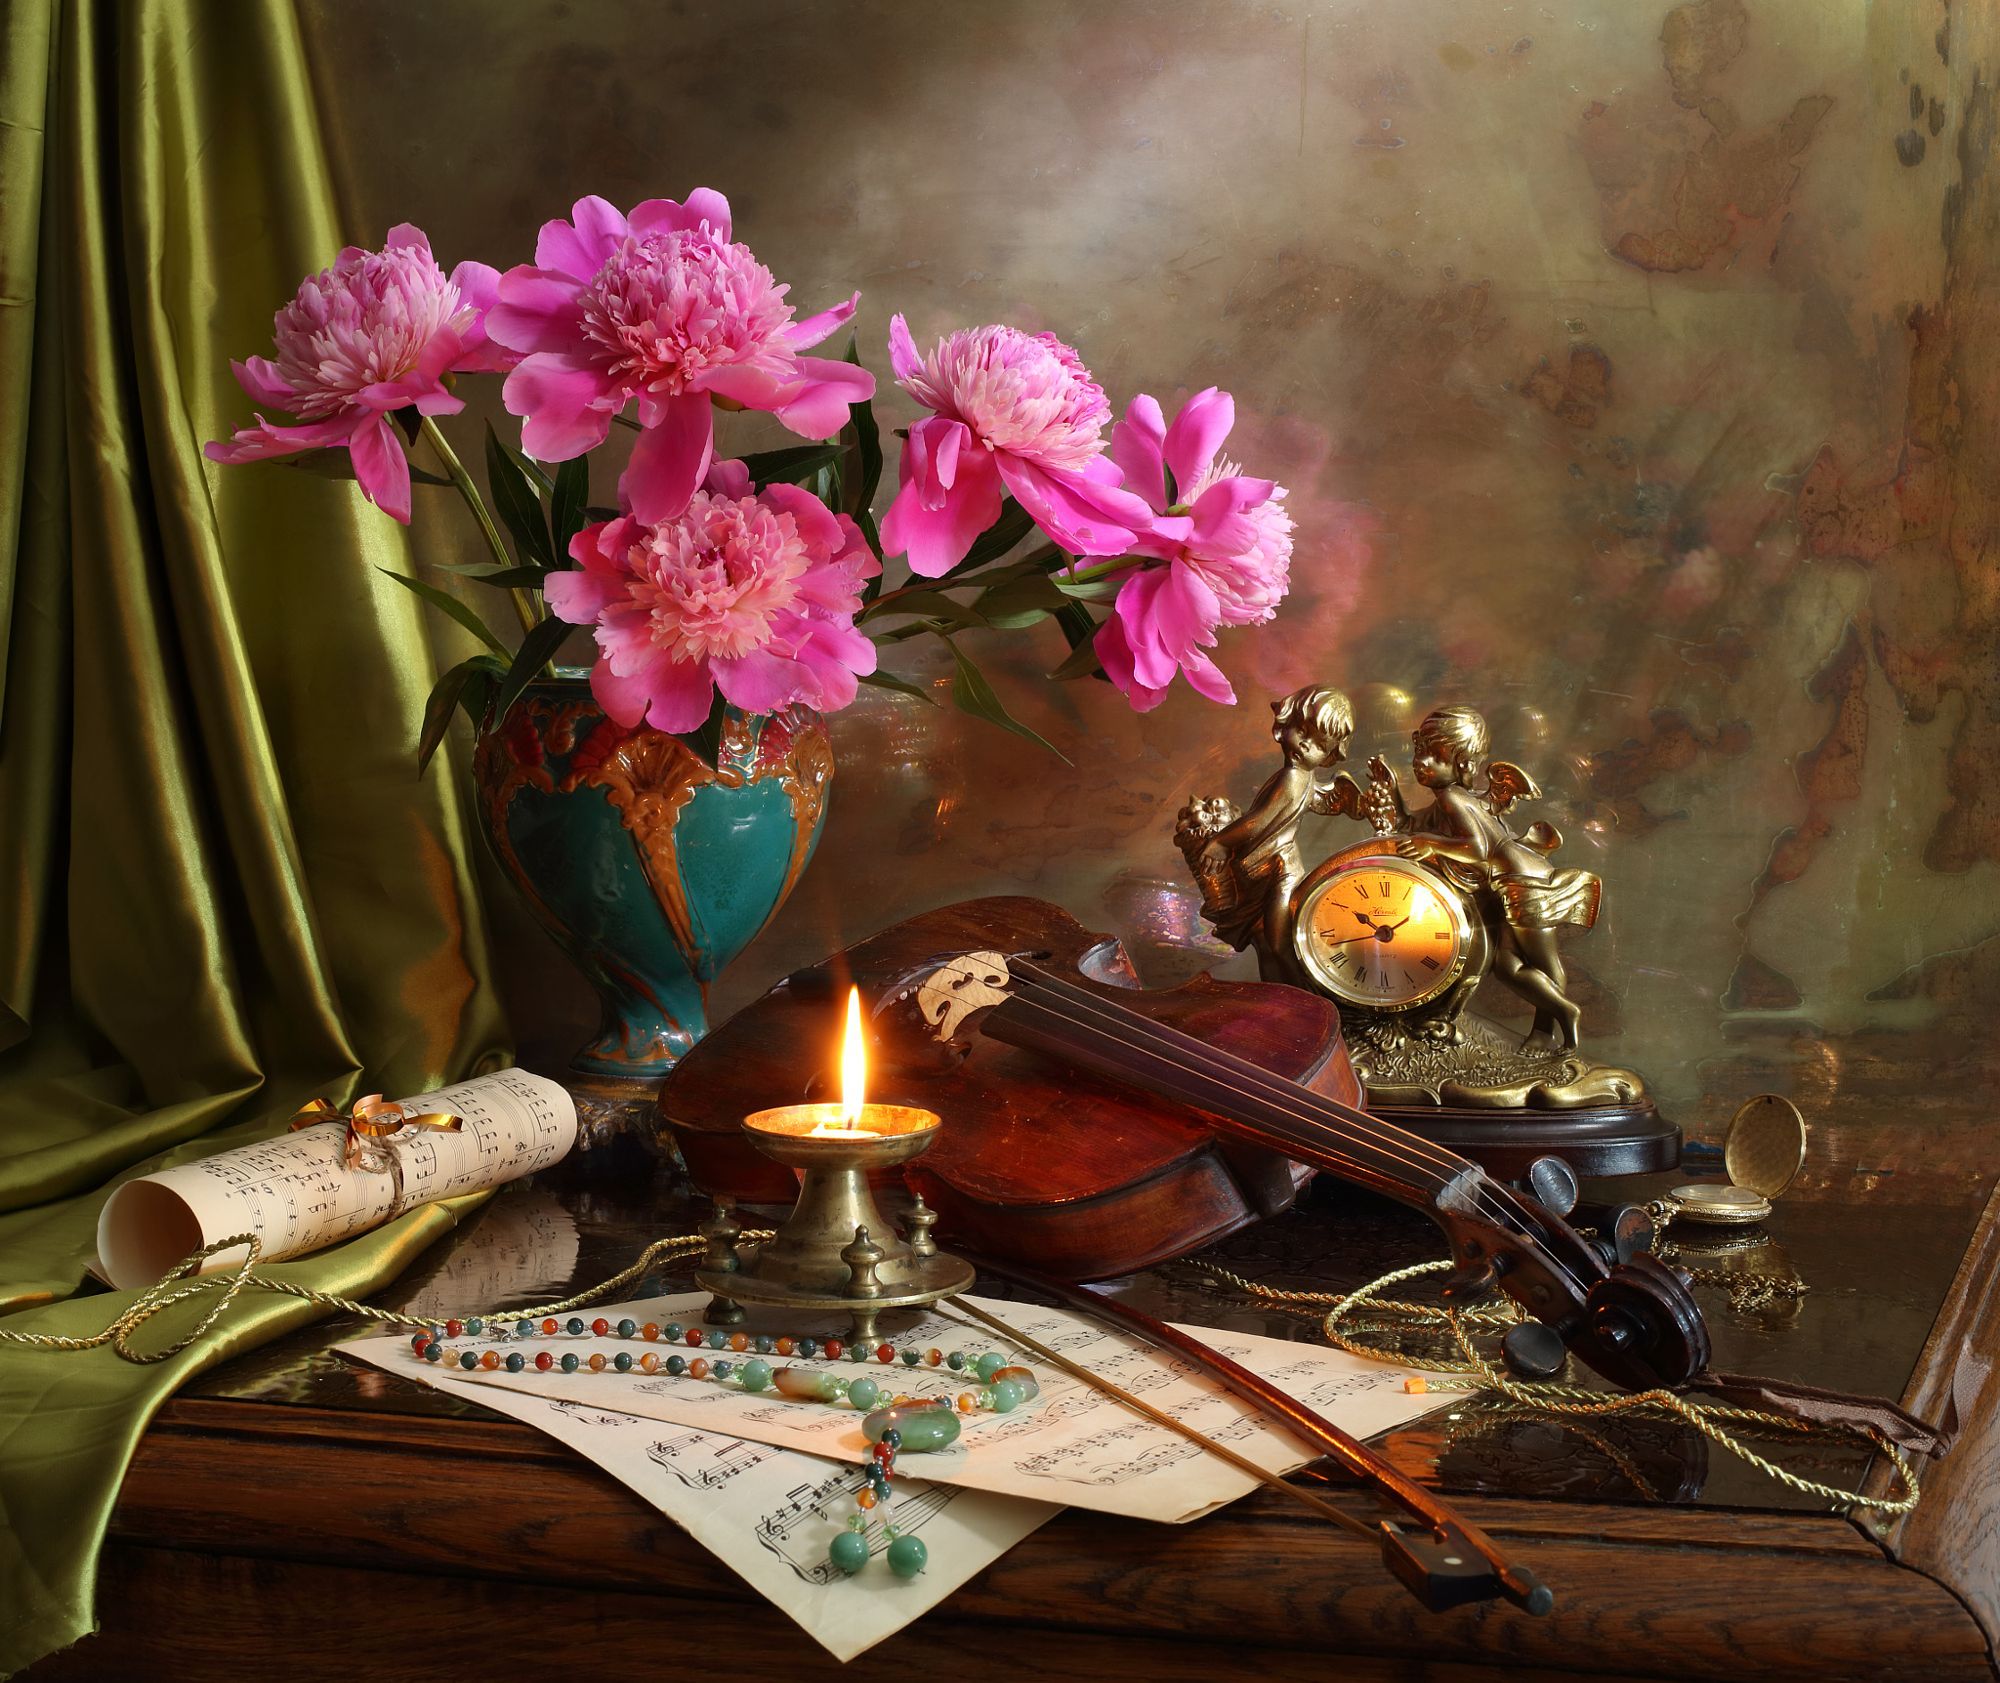 photography, still life, candle, flower, pink flower, sheet music, violin